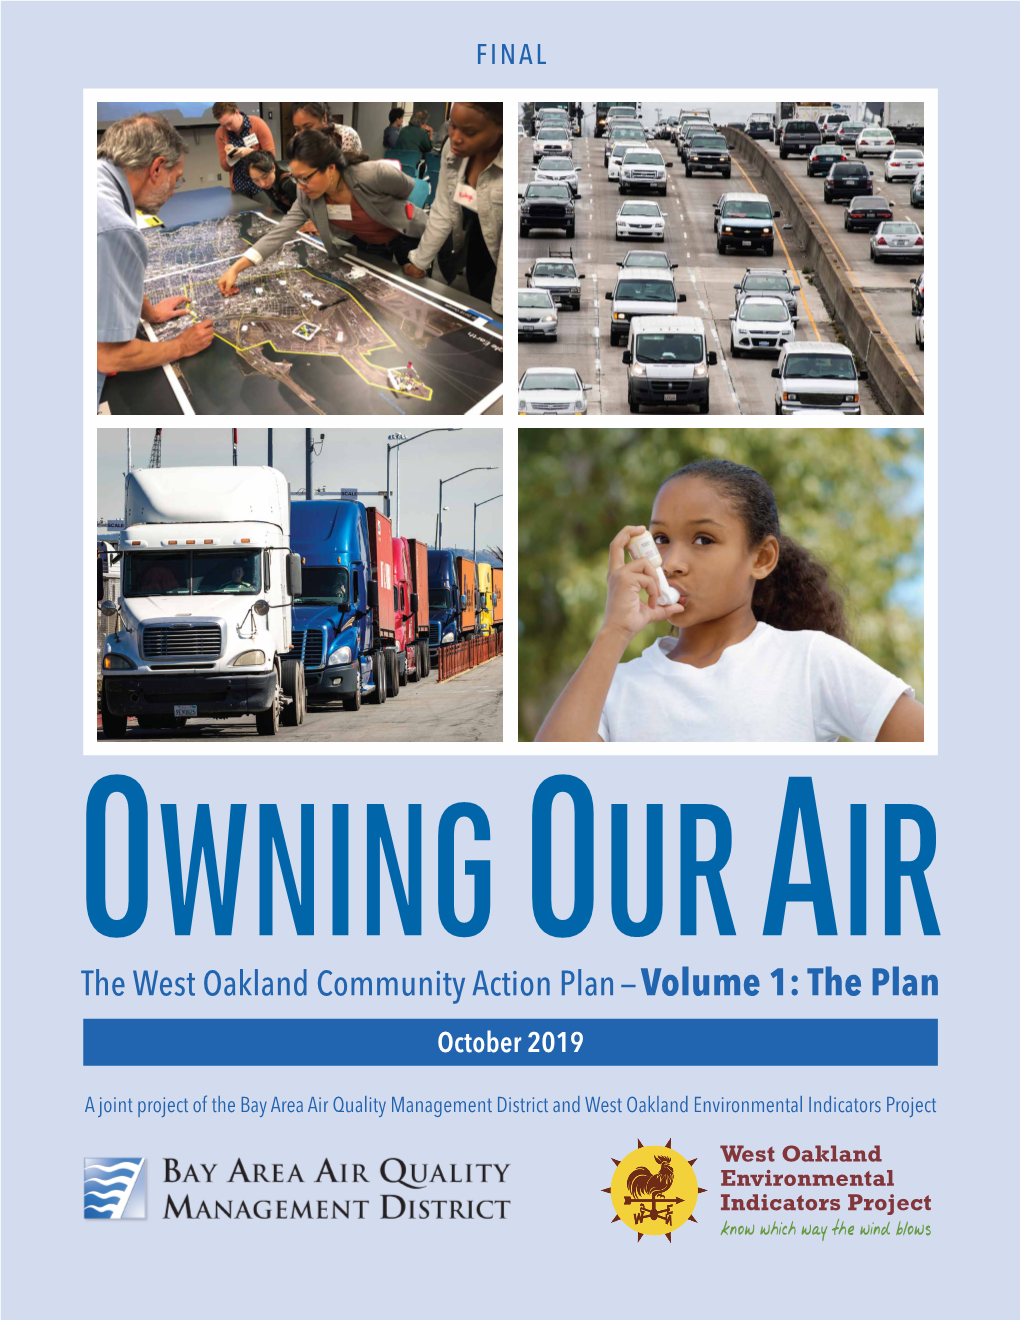 The West Oakland Community Action Plan — Volume 1: the Plan